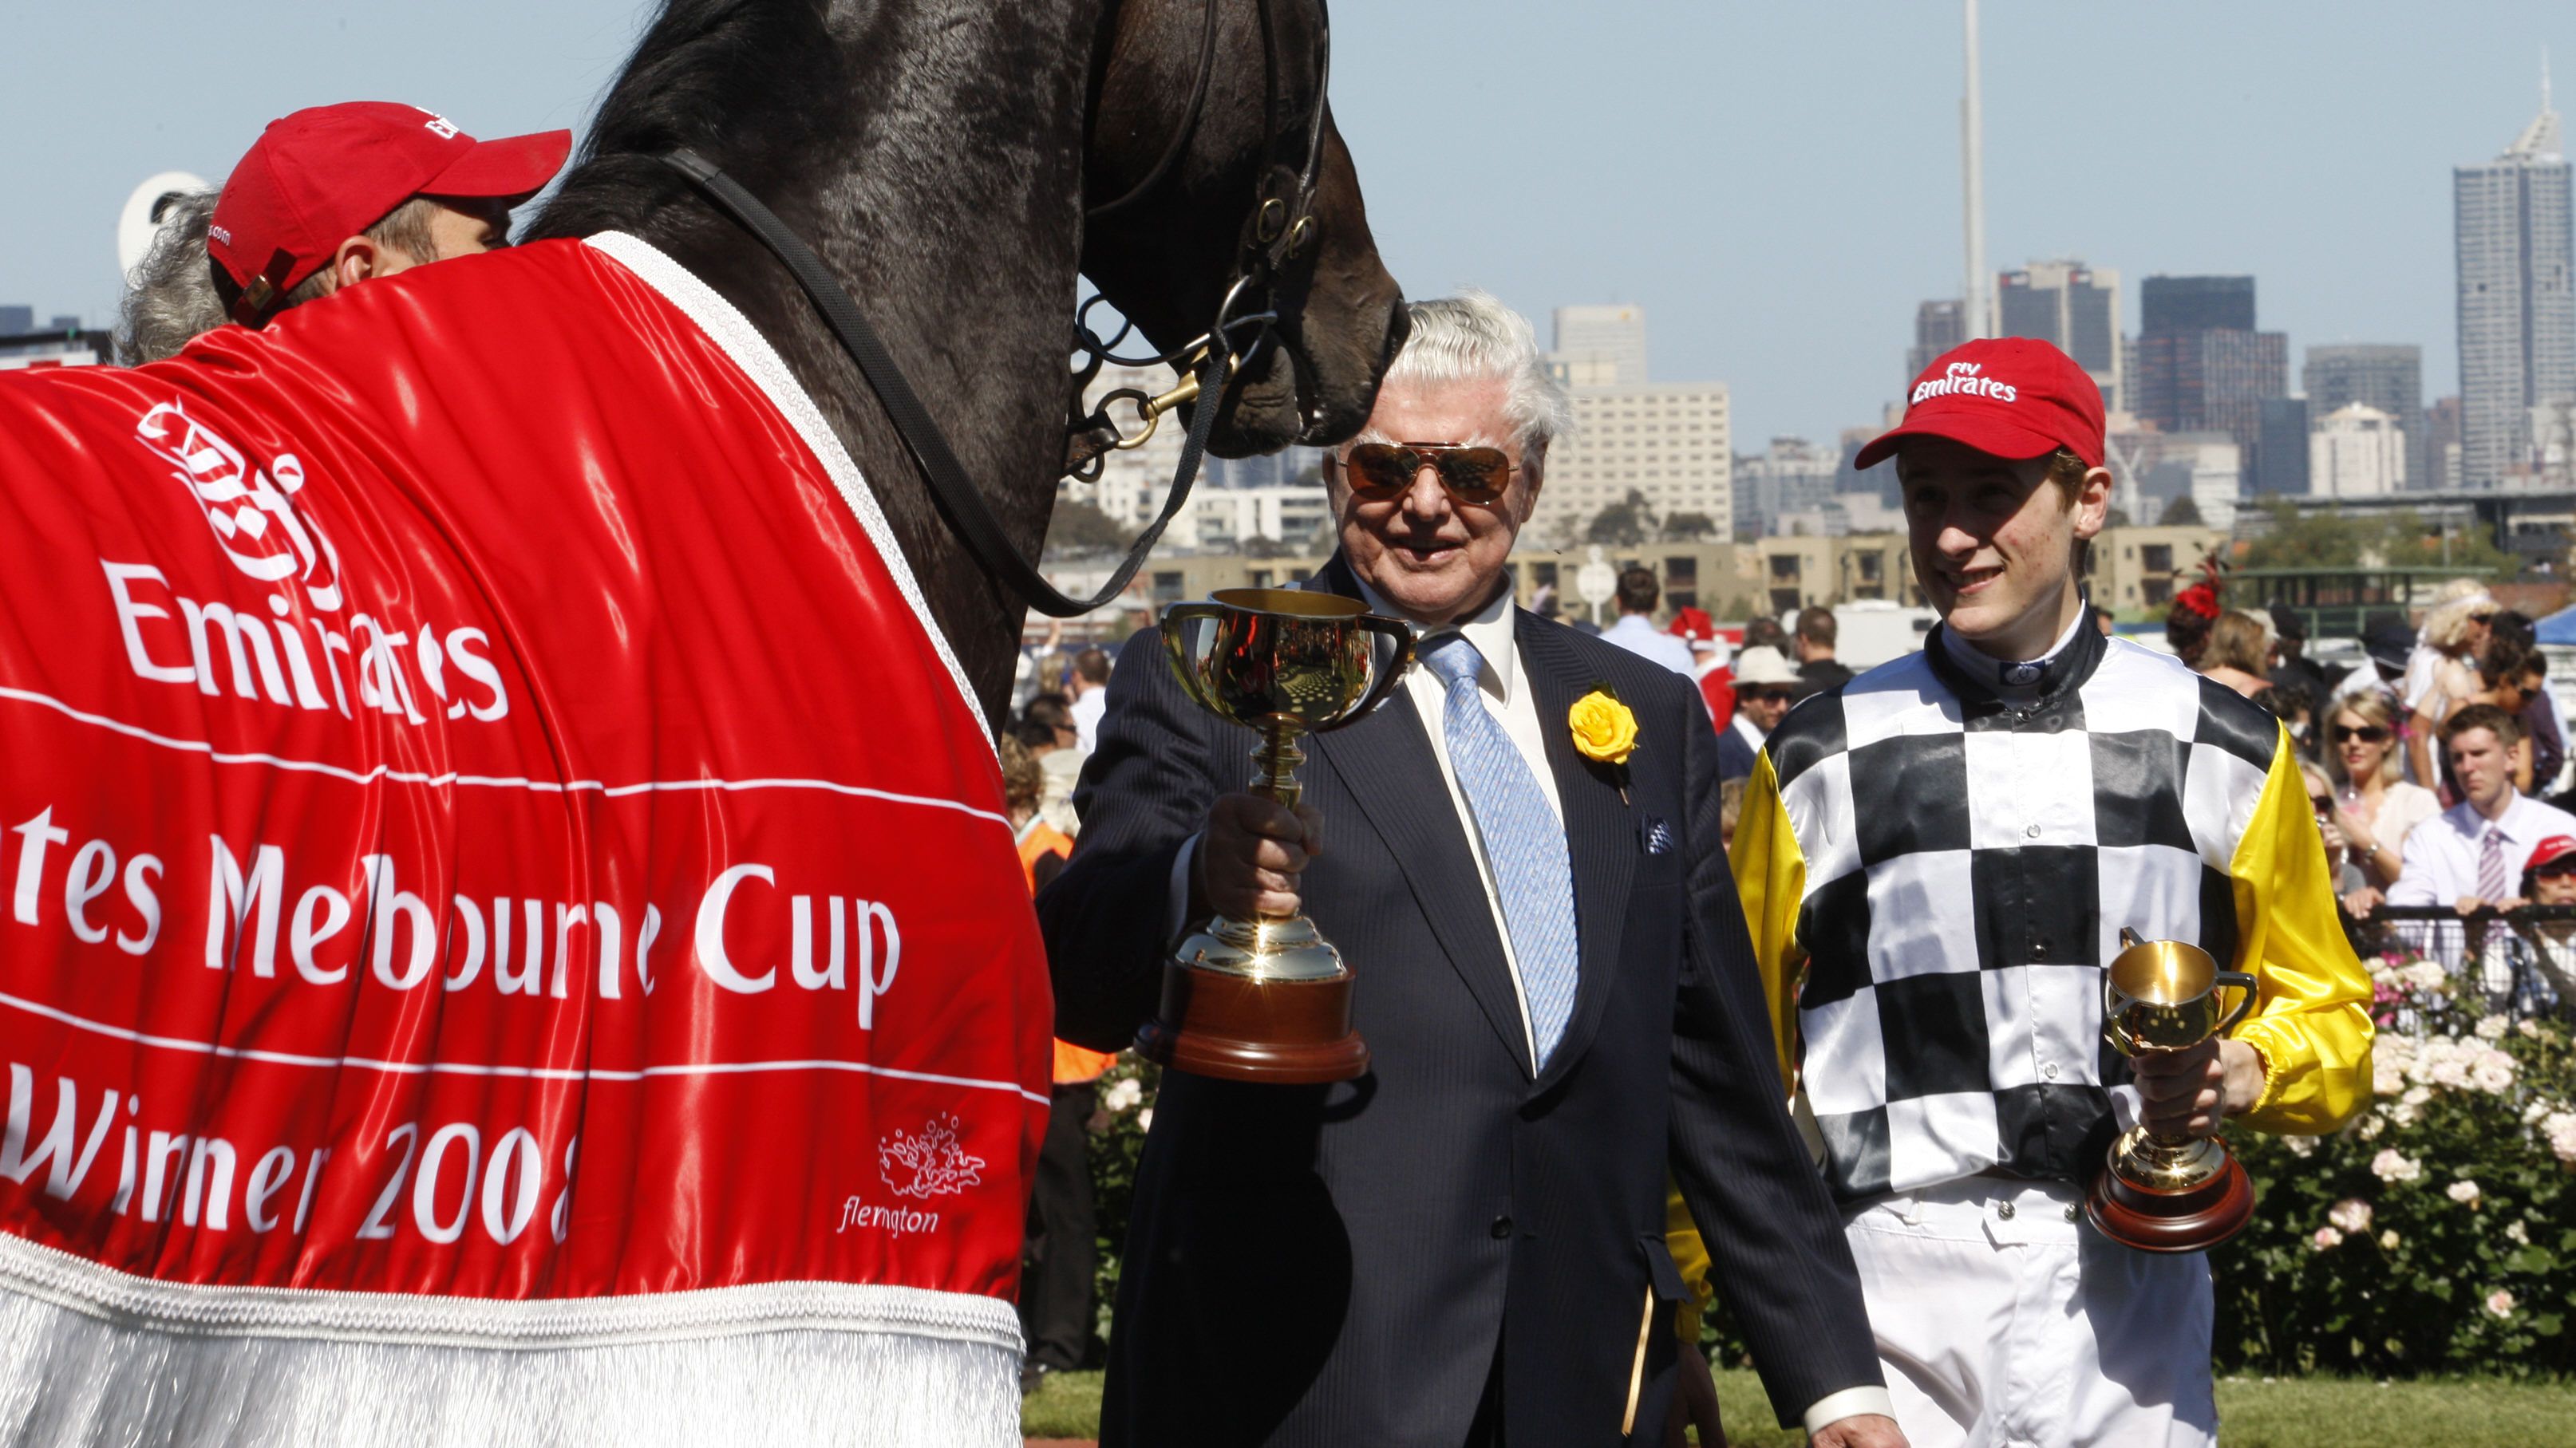 &#x27;Cups King&#x27; Bart Cummings with jockey Blake Shinn after their horse Viewed won the Melbourne Cup in 2008.